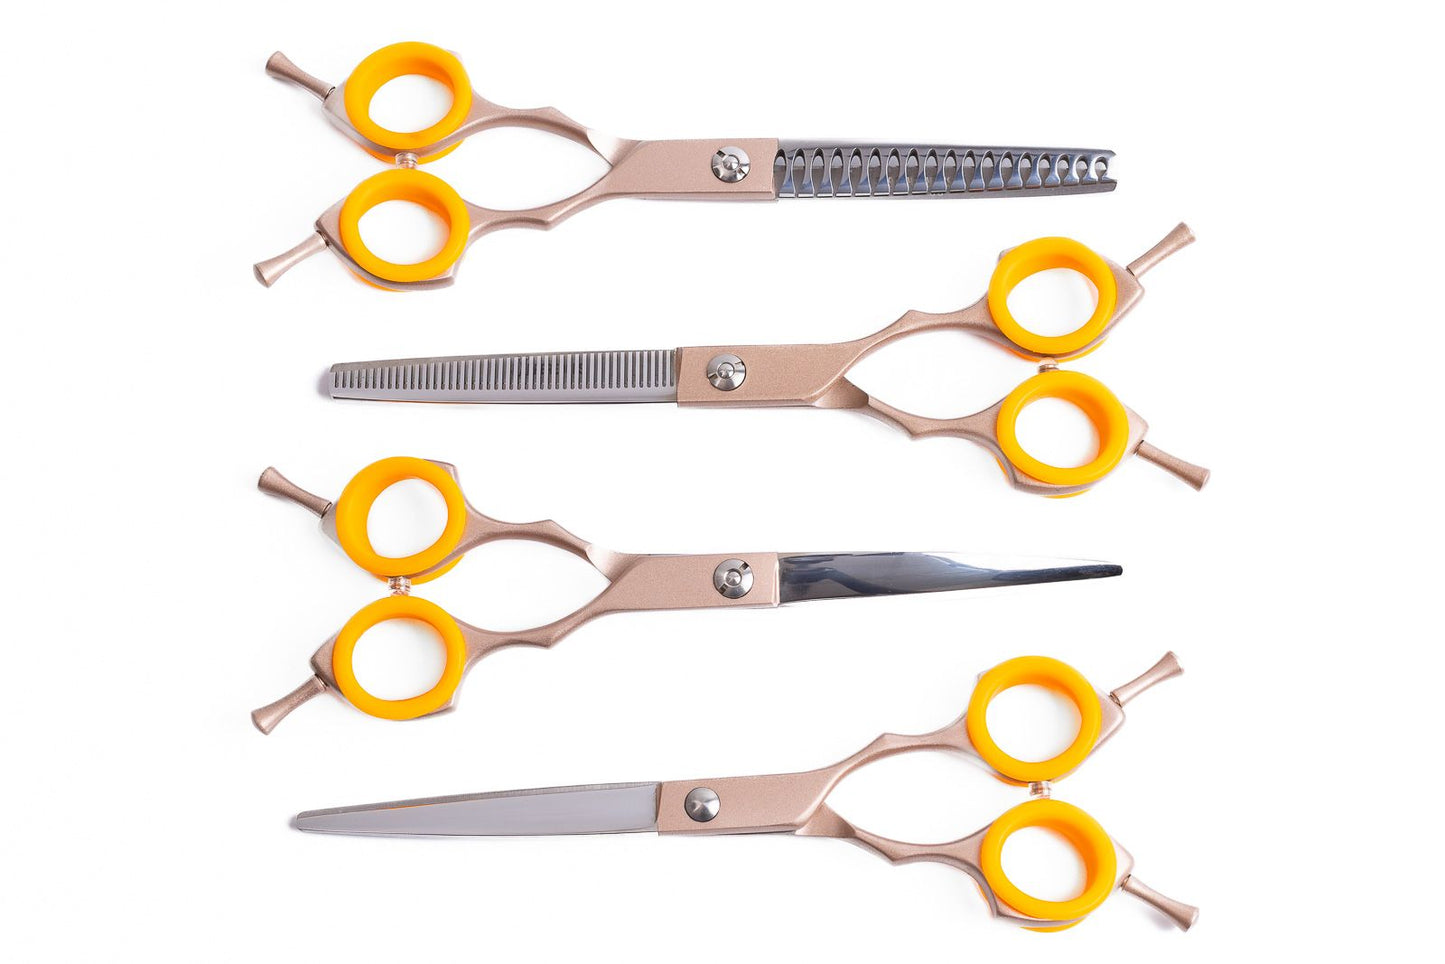 Viola 6.5" set of 4 Scissors (Right Hands) with case and Free Comb